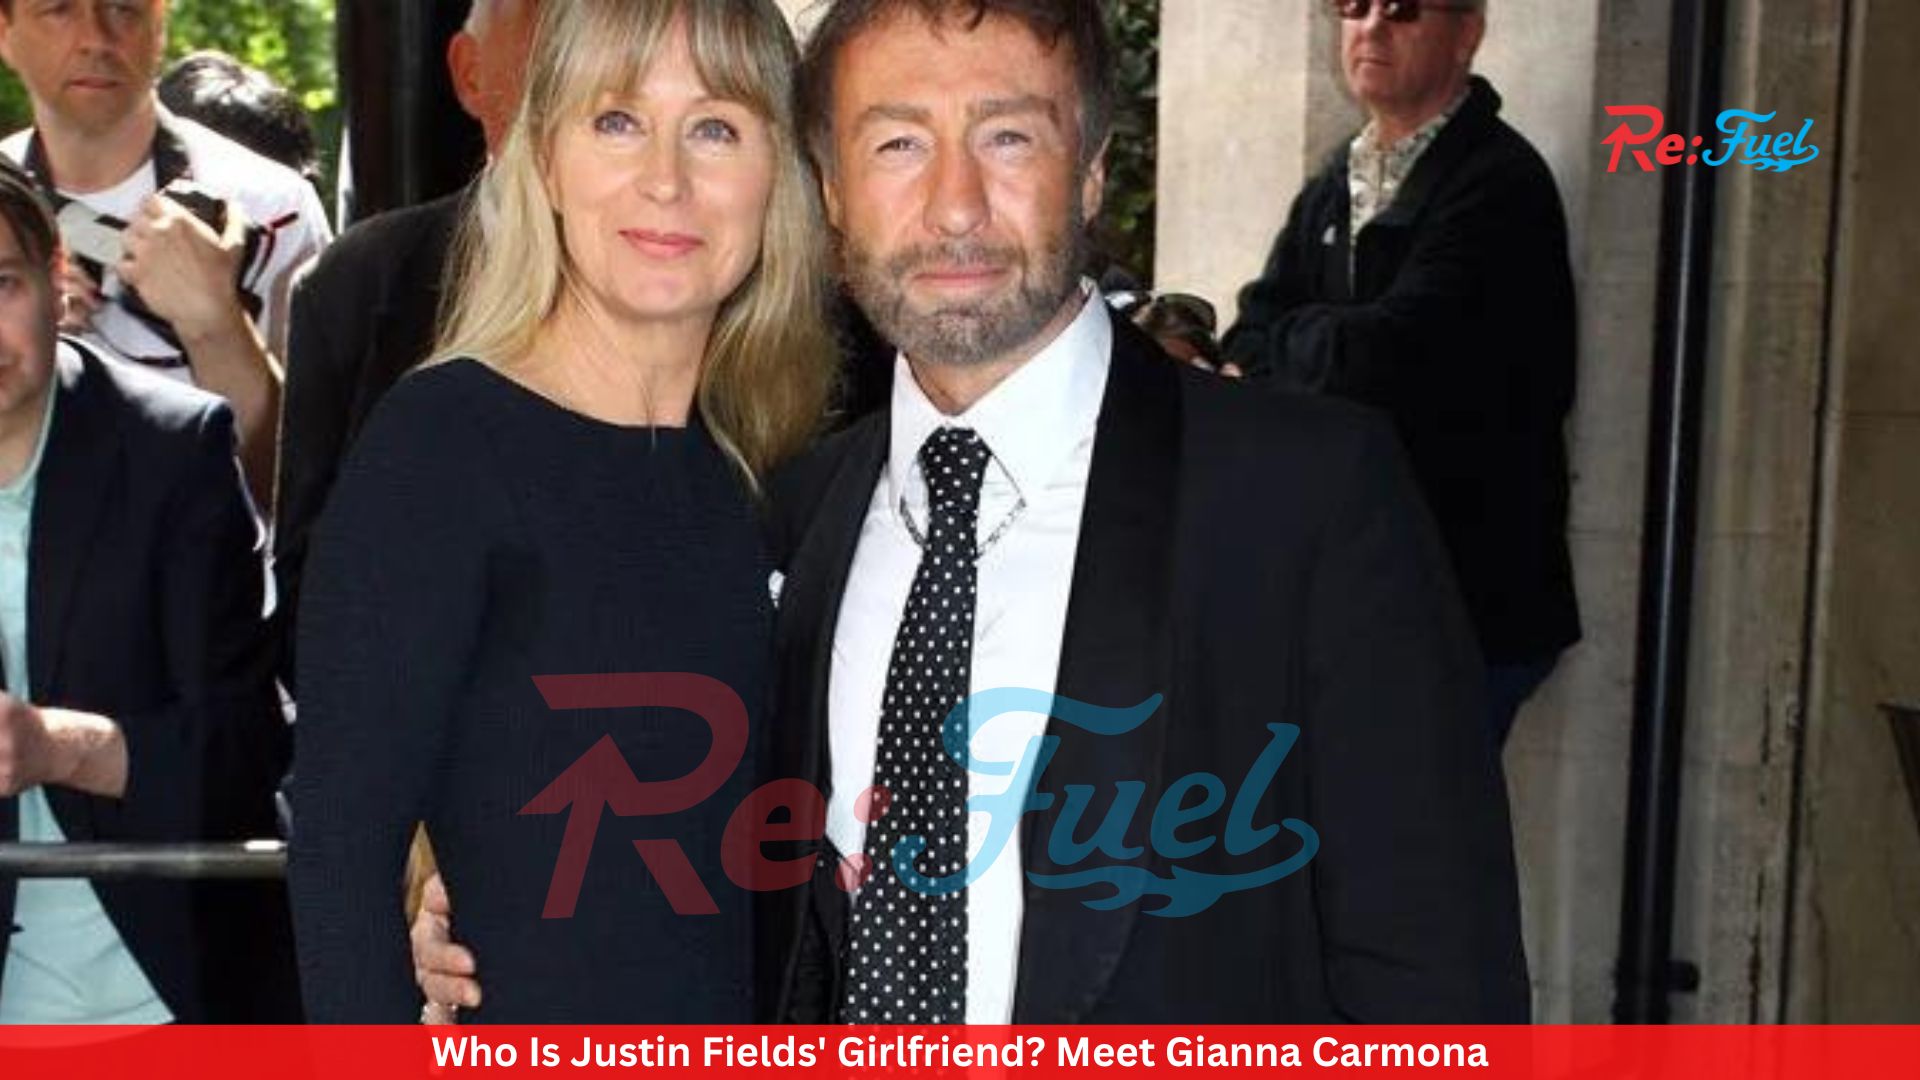 Who Is Paul Rodgers' Wife? A Look Into Their Personal Life